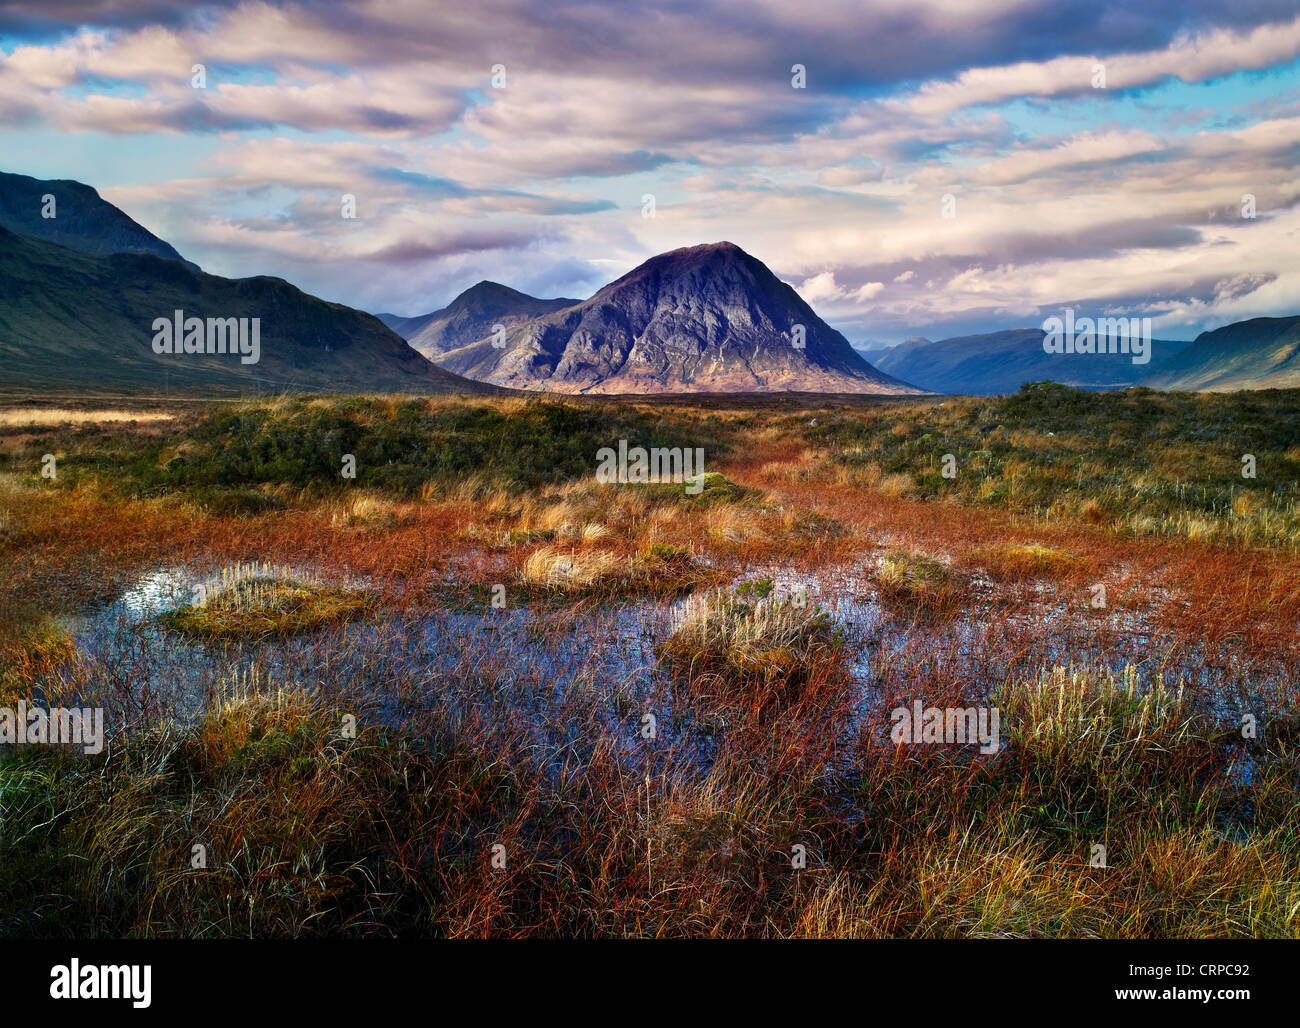 View across Rannoch Moor towards Buachaille Etive Mor, one of the most recognisable mountains in Scotland. Stock Photo